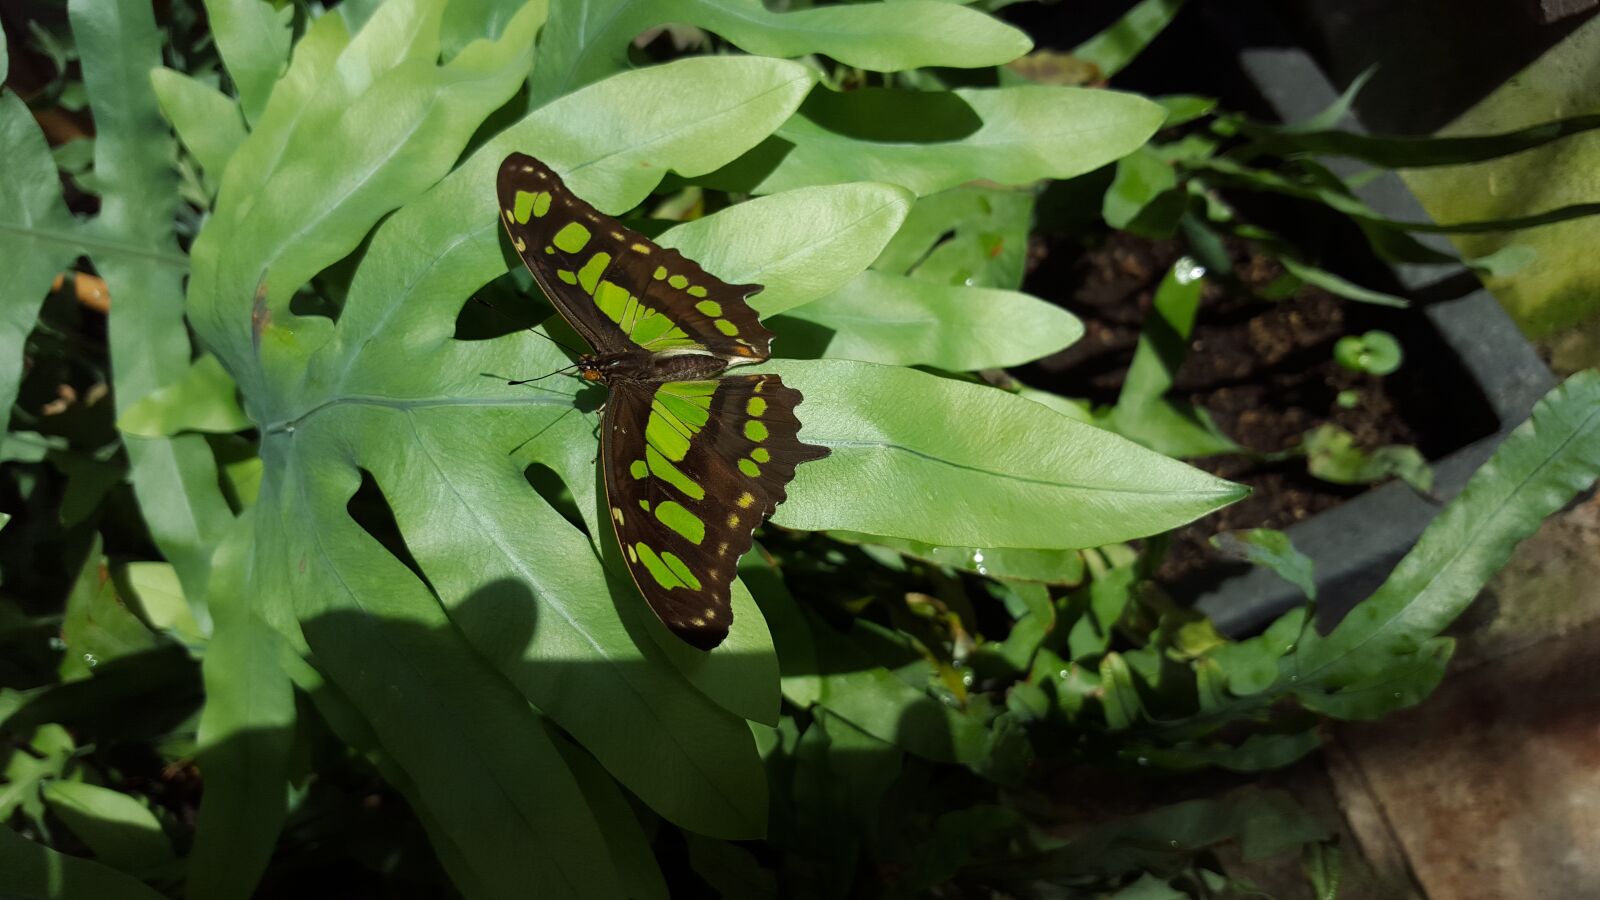 Samsung Galaxy S6 sample photo. Butterfly, green, insect photography